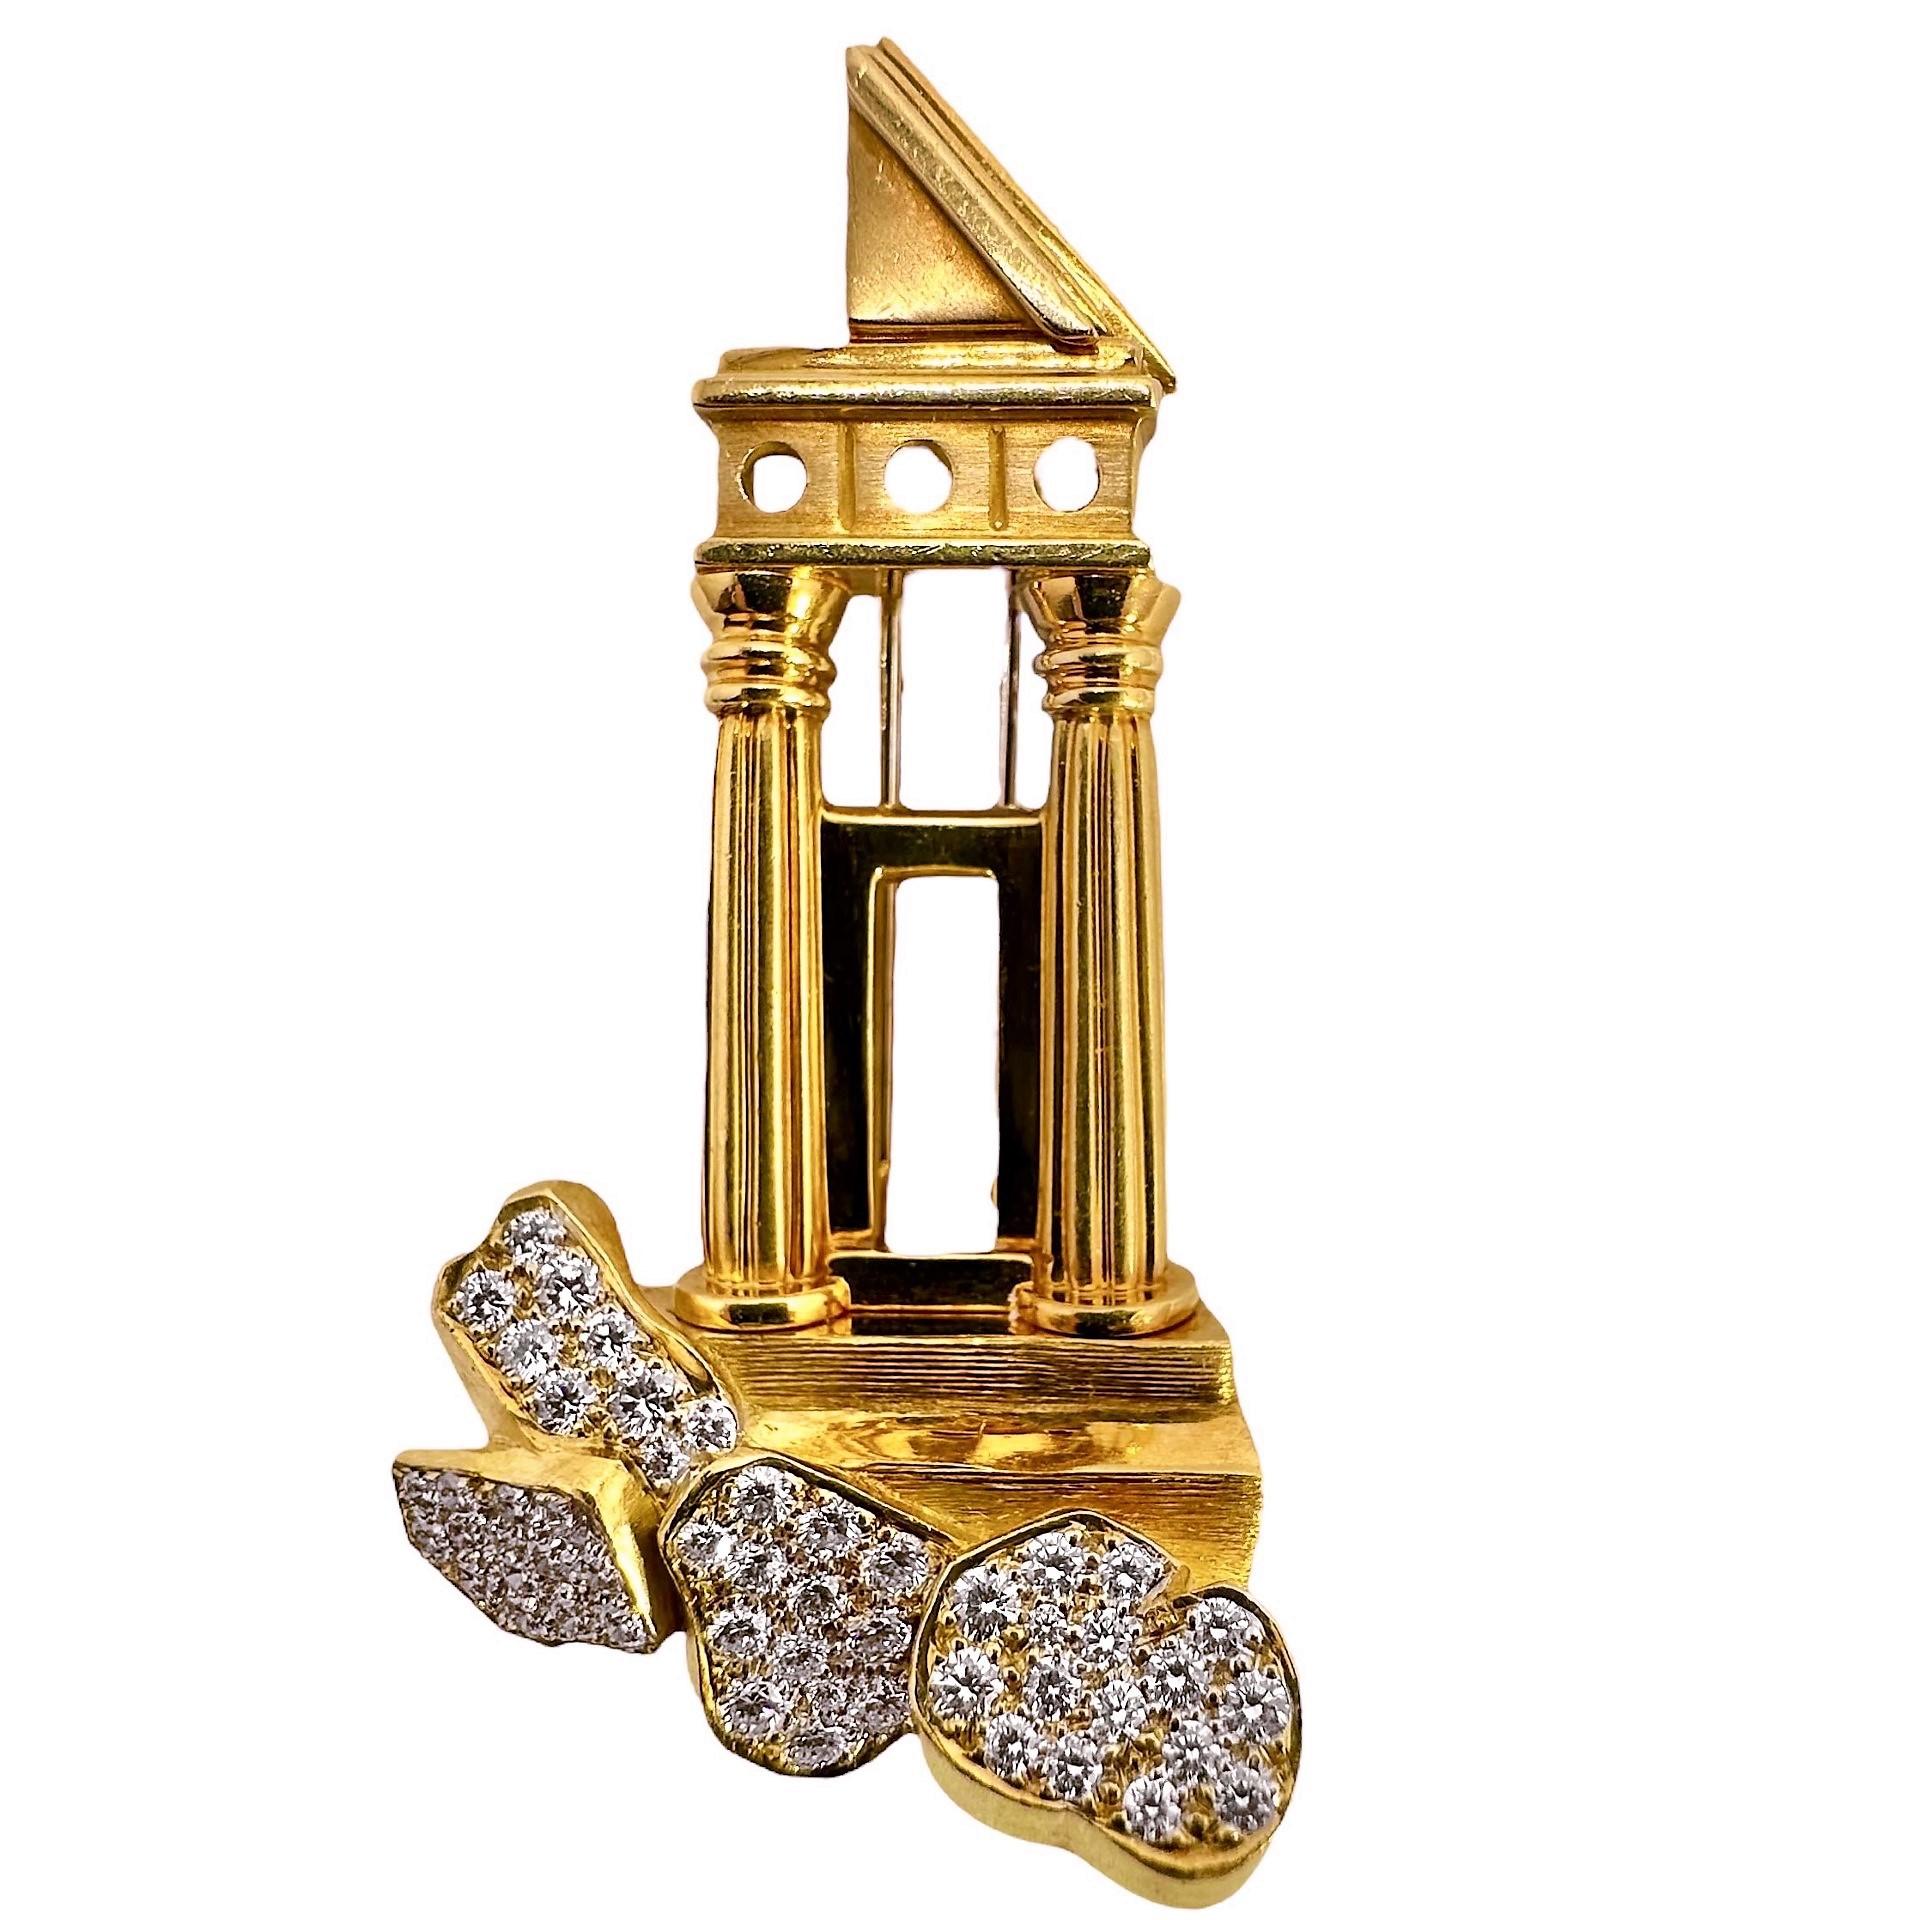 This striking vintage Dunay gold and diamond brooch evokes images of the Greek Parthenon or perhaps the ancient Roman Forum. It is large, measuring in excess of 2 inches long by 1.14 inches wide. It is very dimensional with bold columns and roof